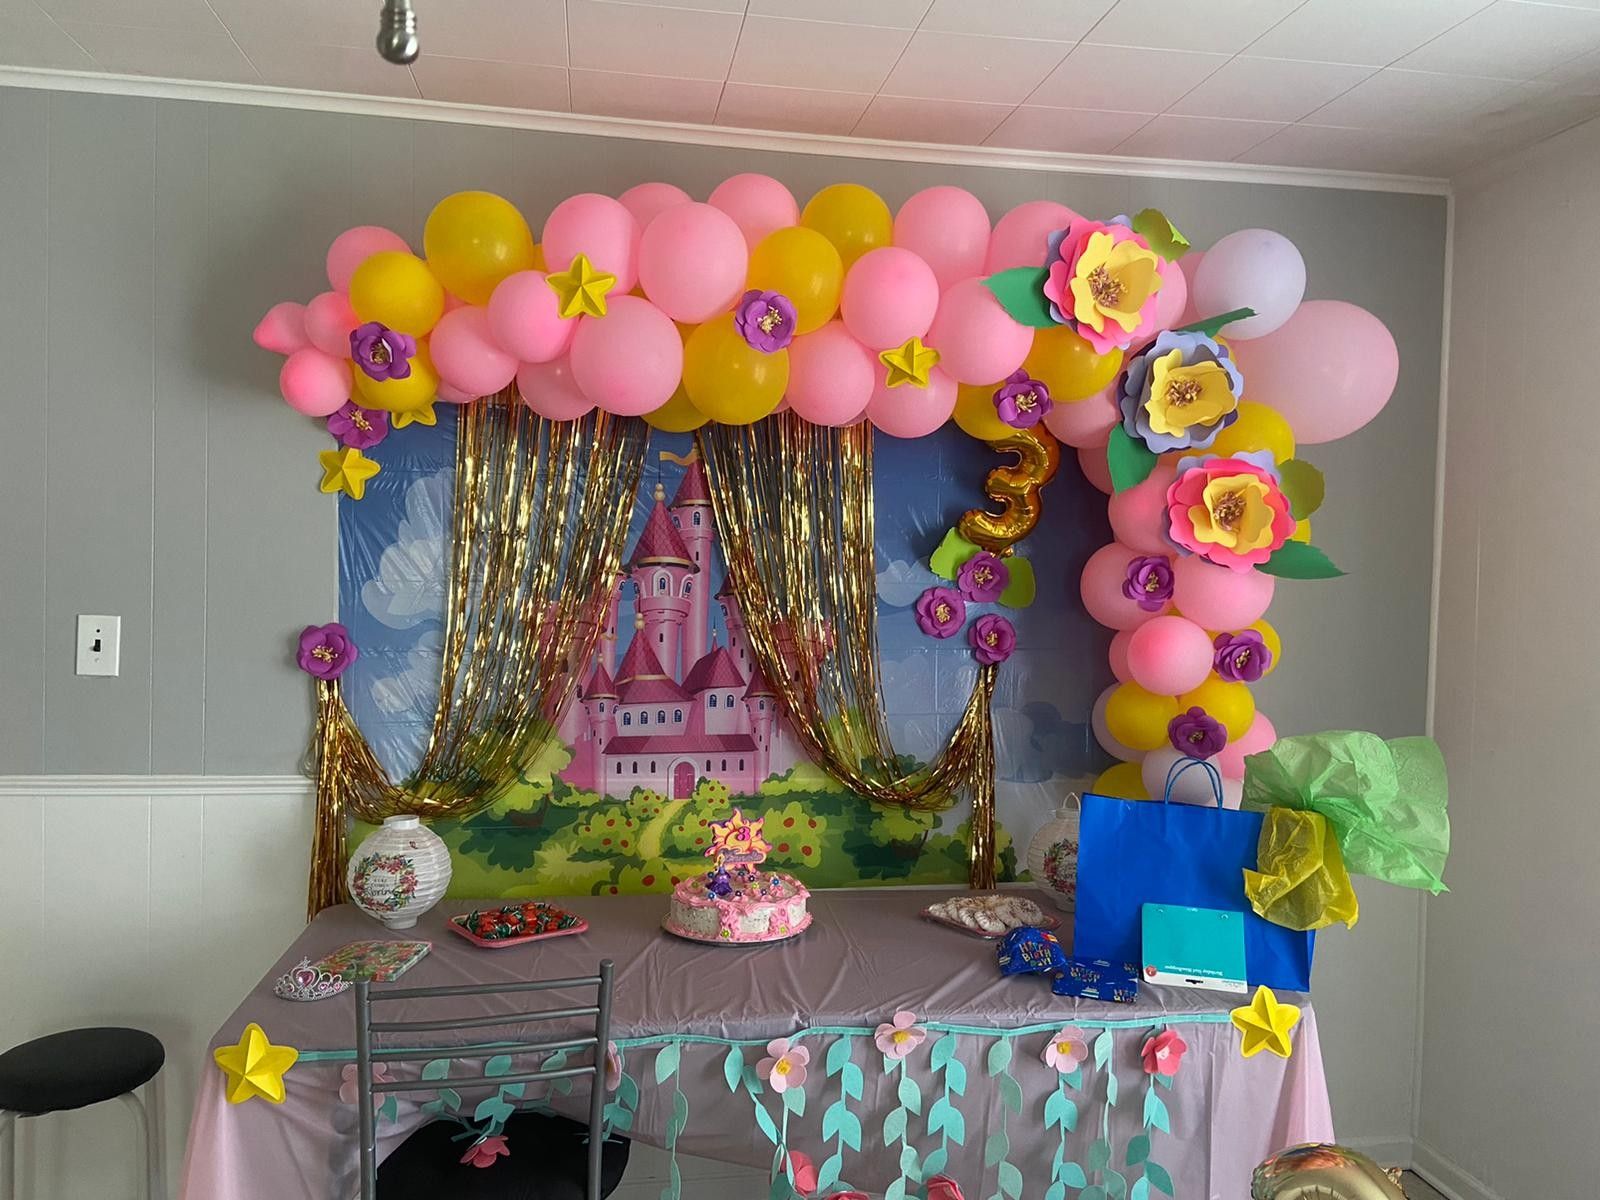 decoration with balloons and paper flowers.